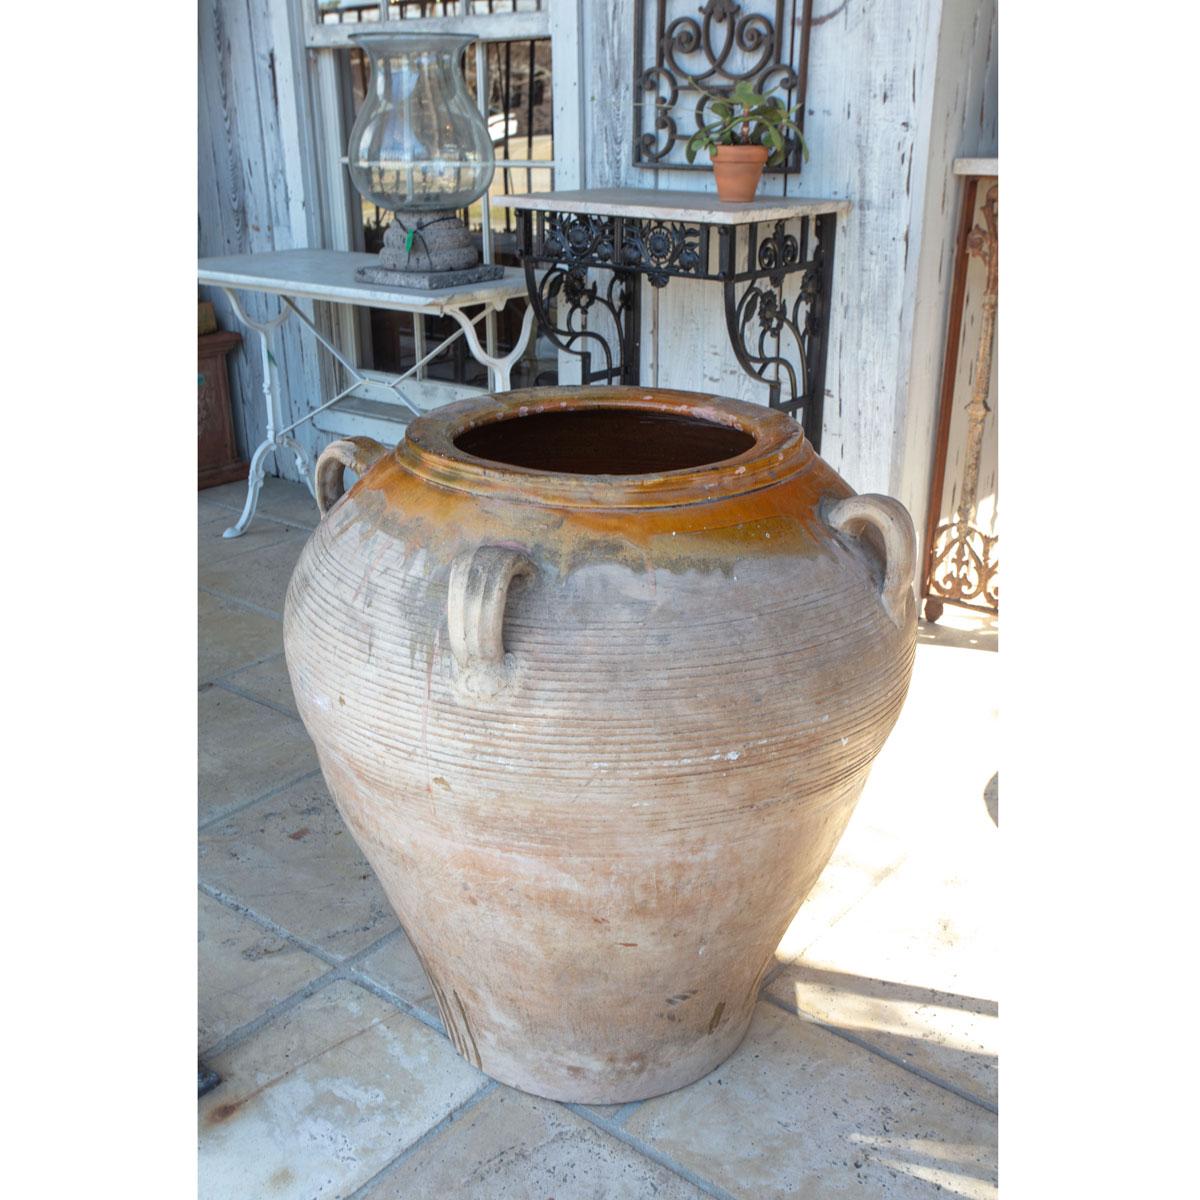 This large clay olive jar has been partially glazed in an earthen orange/yellow color. There are four handles equally spaced around the top of the jar and a ribbed pattern wraps the jar just below the handles. Make a statement on your porch or in